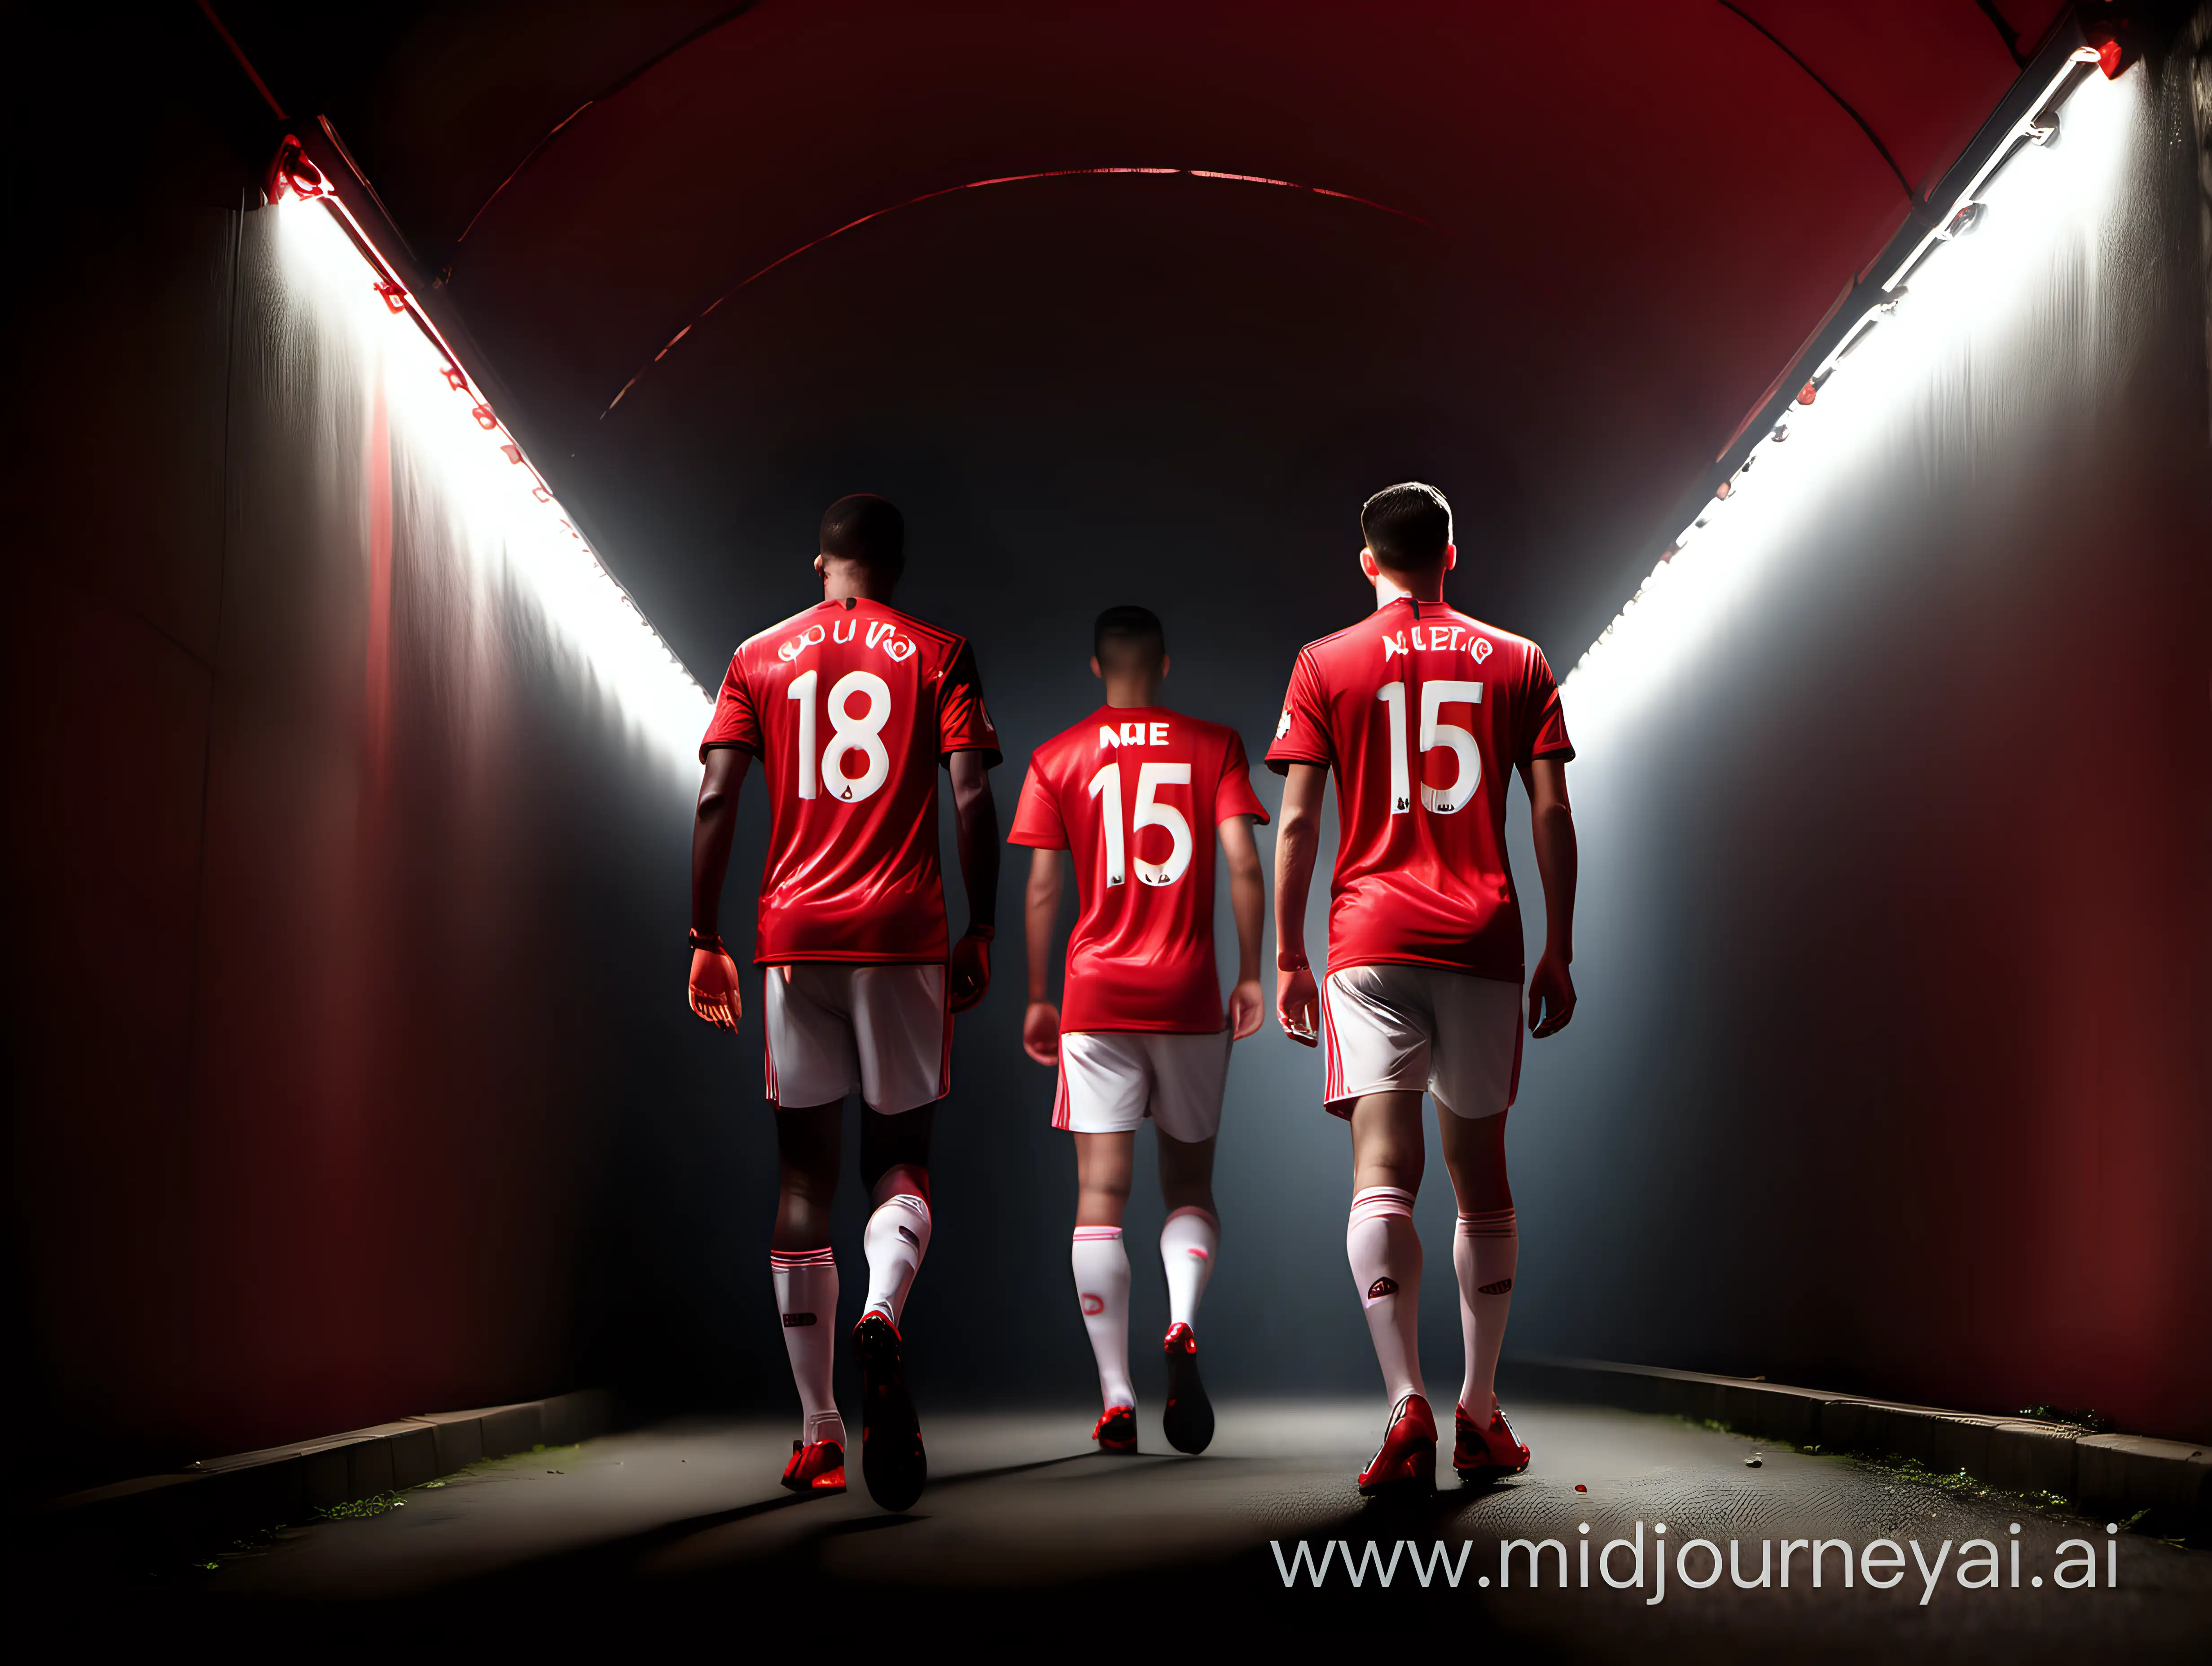 Red tunnel with led dramatic lighting 3 Manchester United Players in red kits, white shorts, walking towards the light from a low angle close up show faces. Front lit, photorealistic. Dutch Angle, side view. Sony a7R IV camera, Meike 85mm F1.8 lens. 